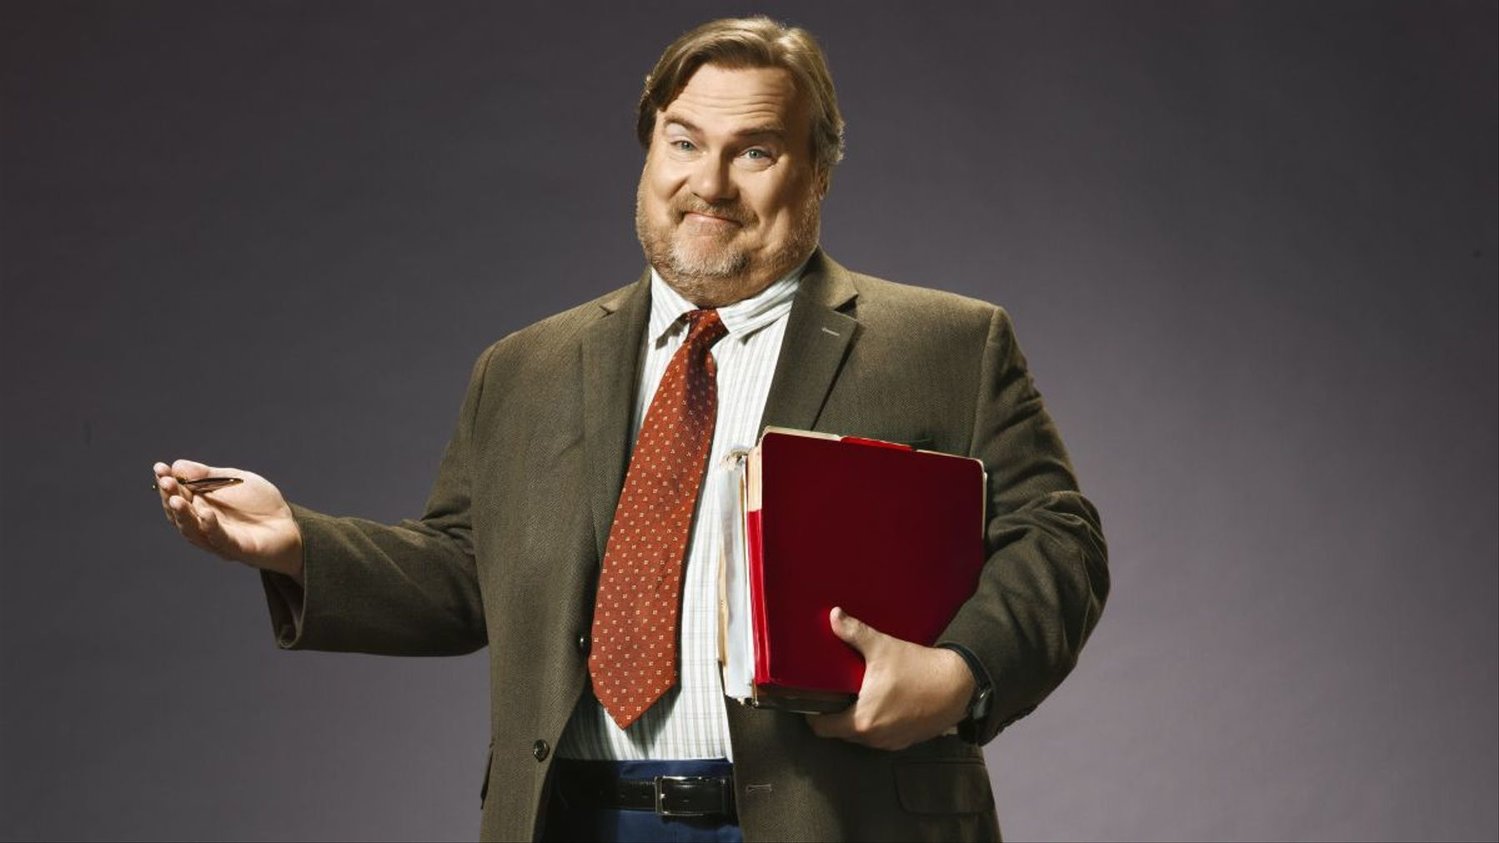 Kevin Farley will headline a comedy event at 7:30 p.m. Nov. 13 at the Crawfordsville Country Club. Tickets are now on ale and may be purchased online at www.MadHatterShows.com.